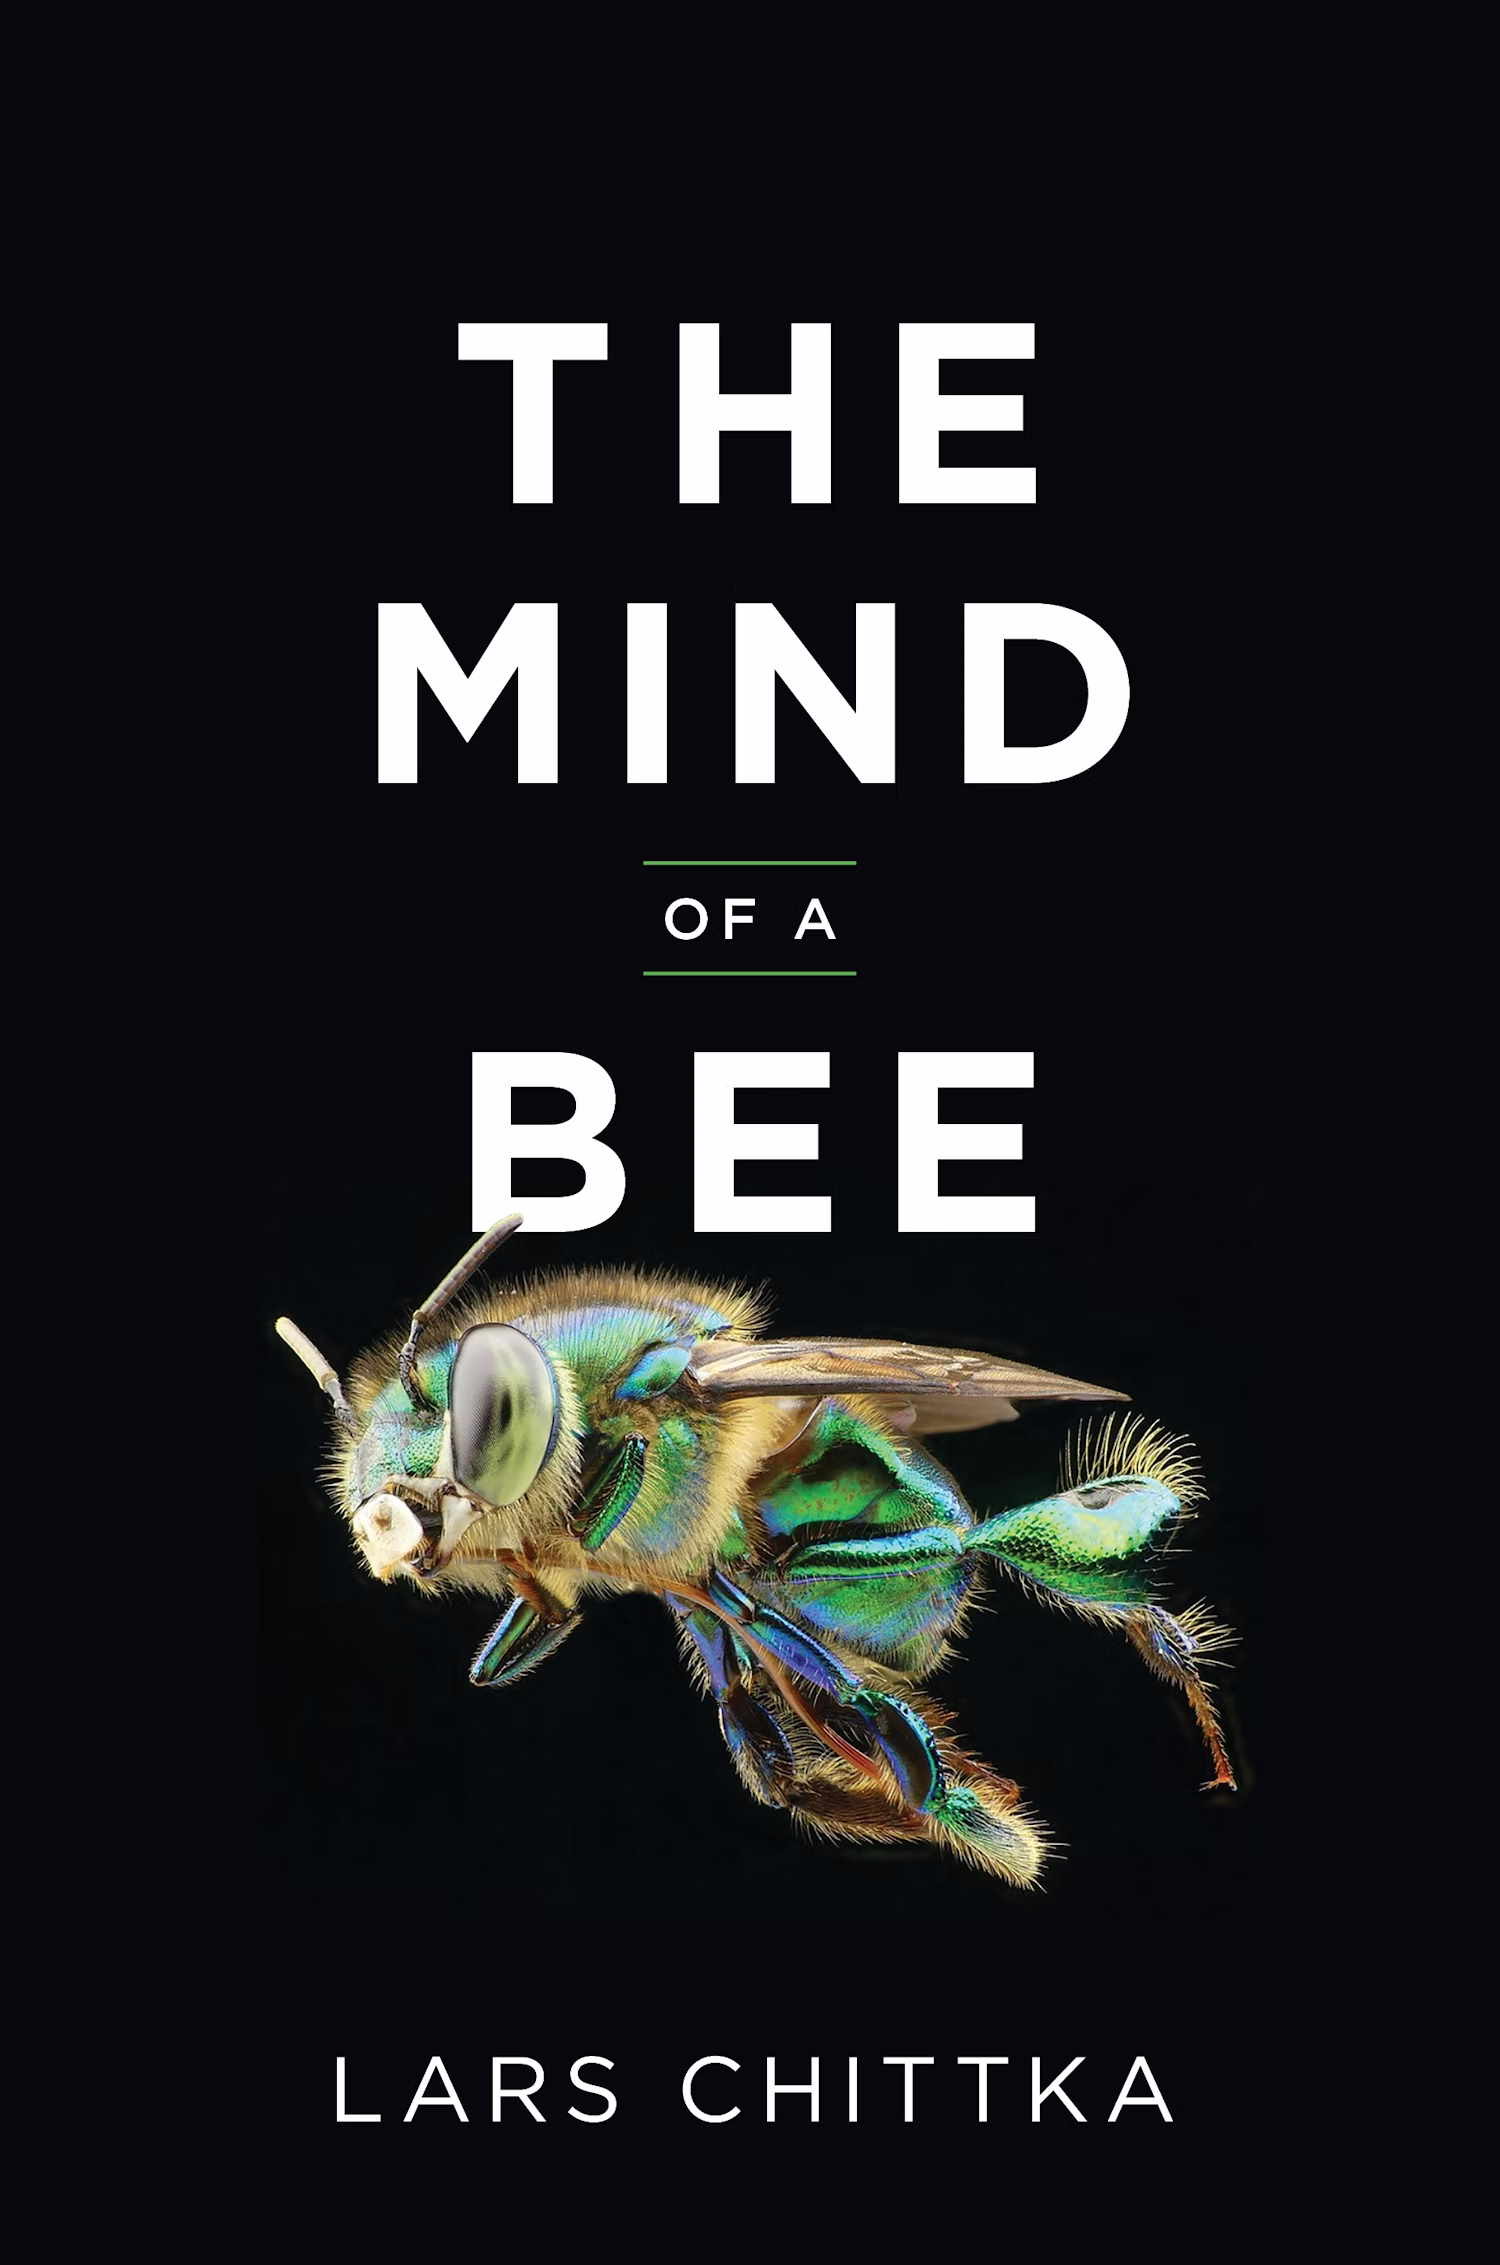 The mind of bee